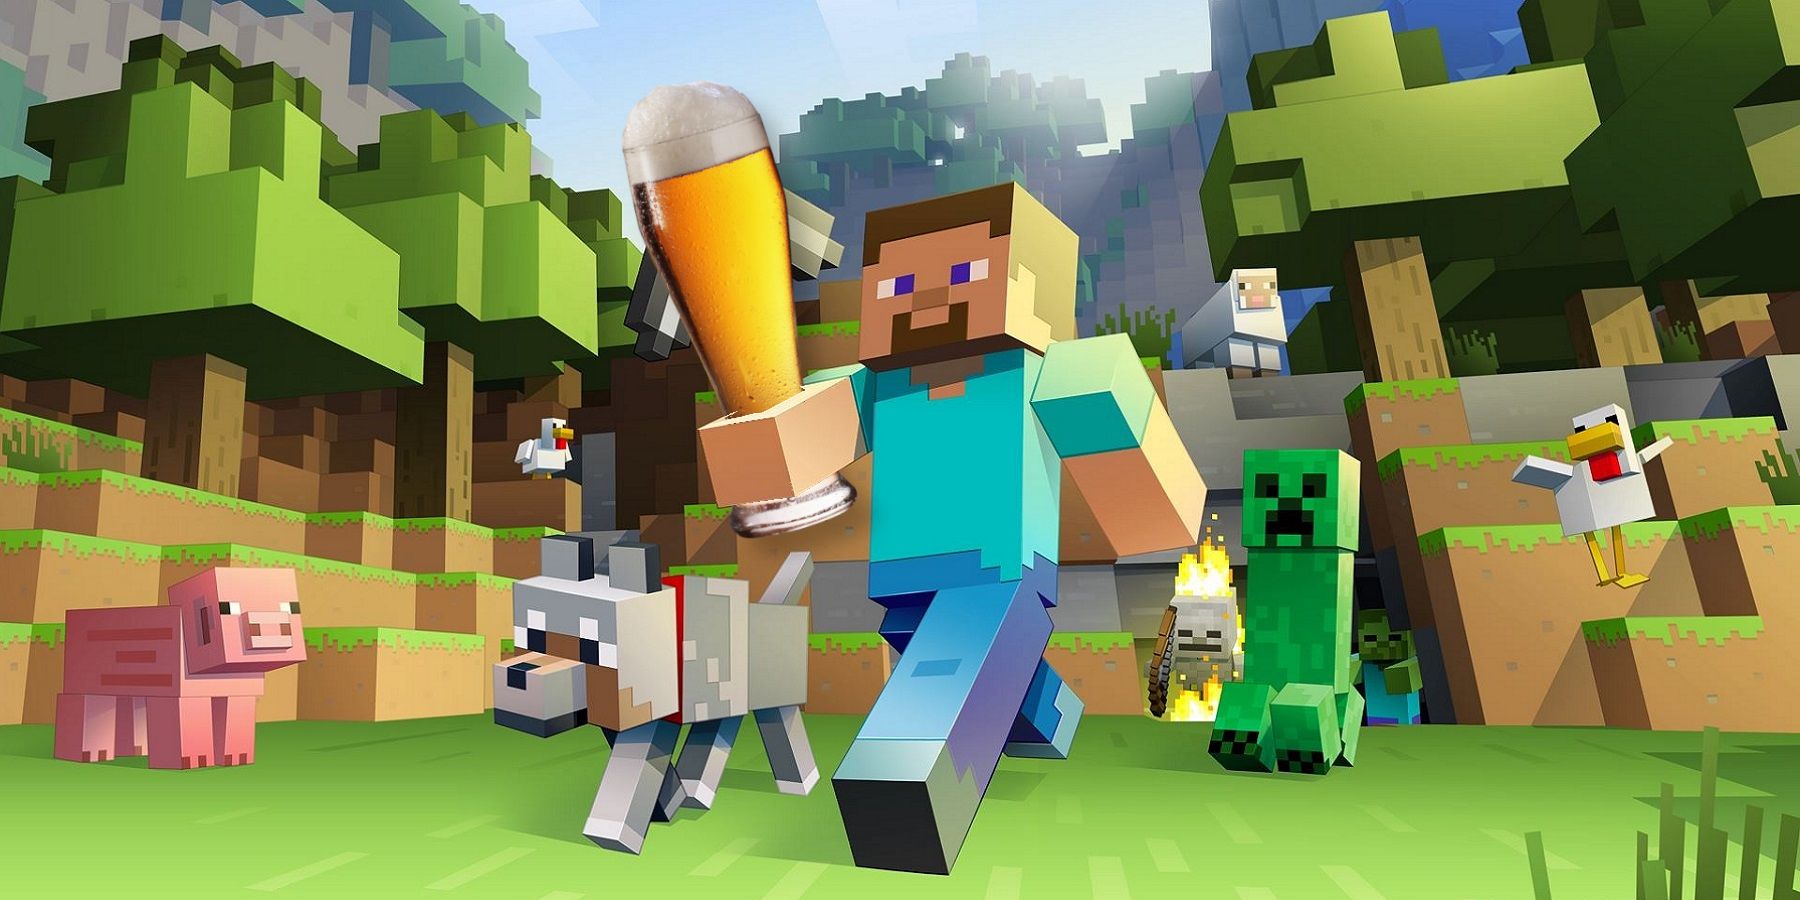 Image from Minecraft showing Steve holding a giant glass of beer.